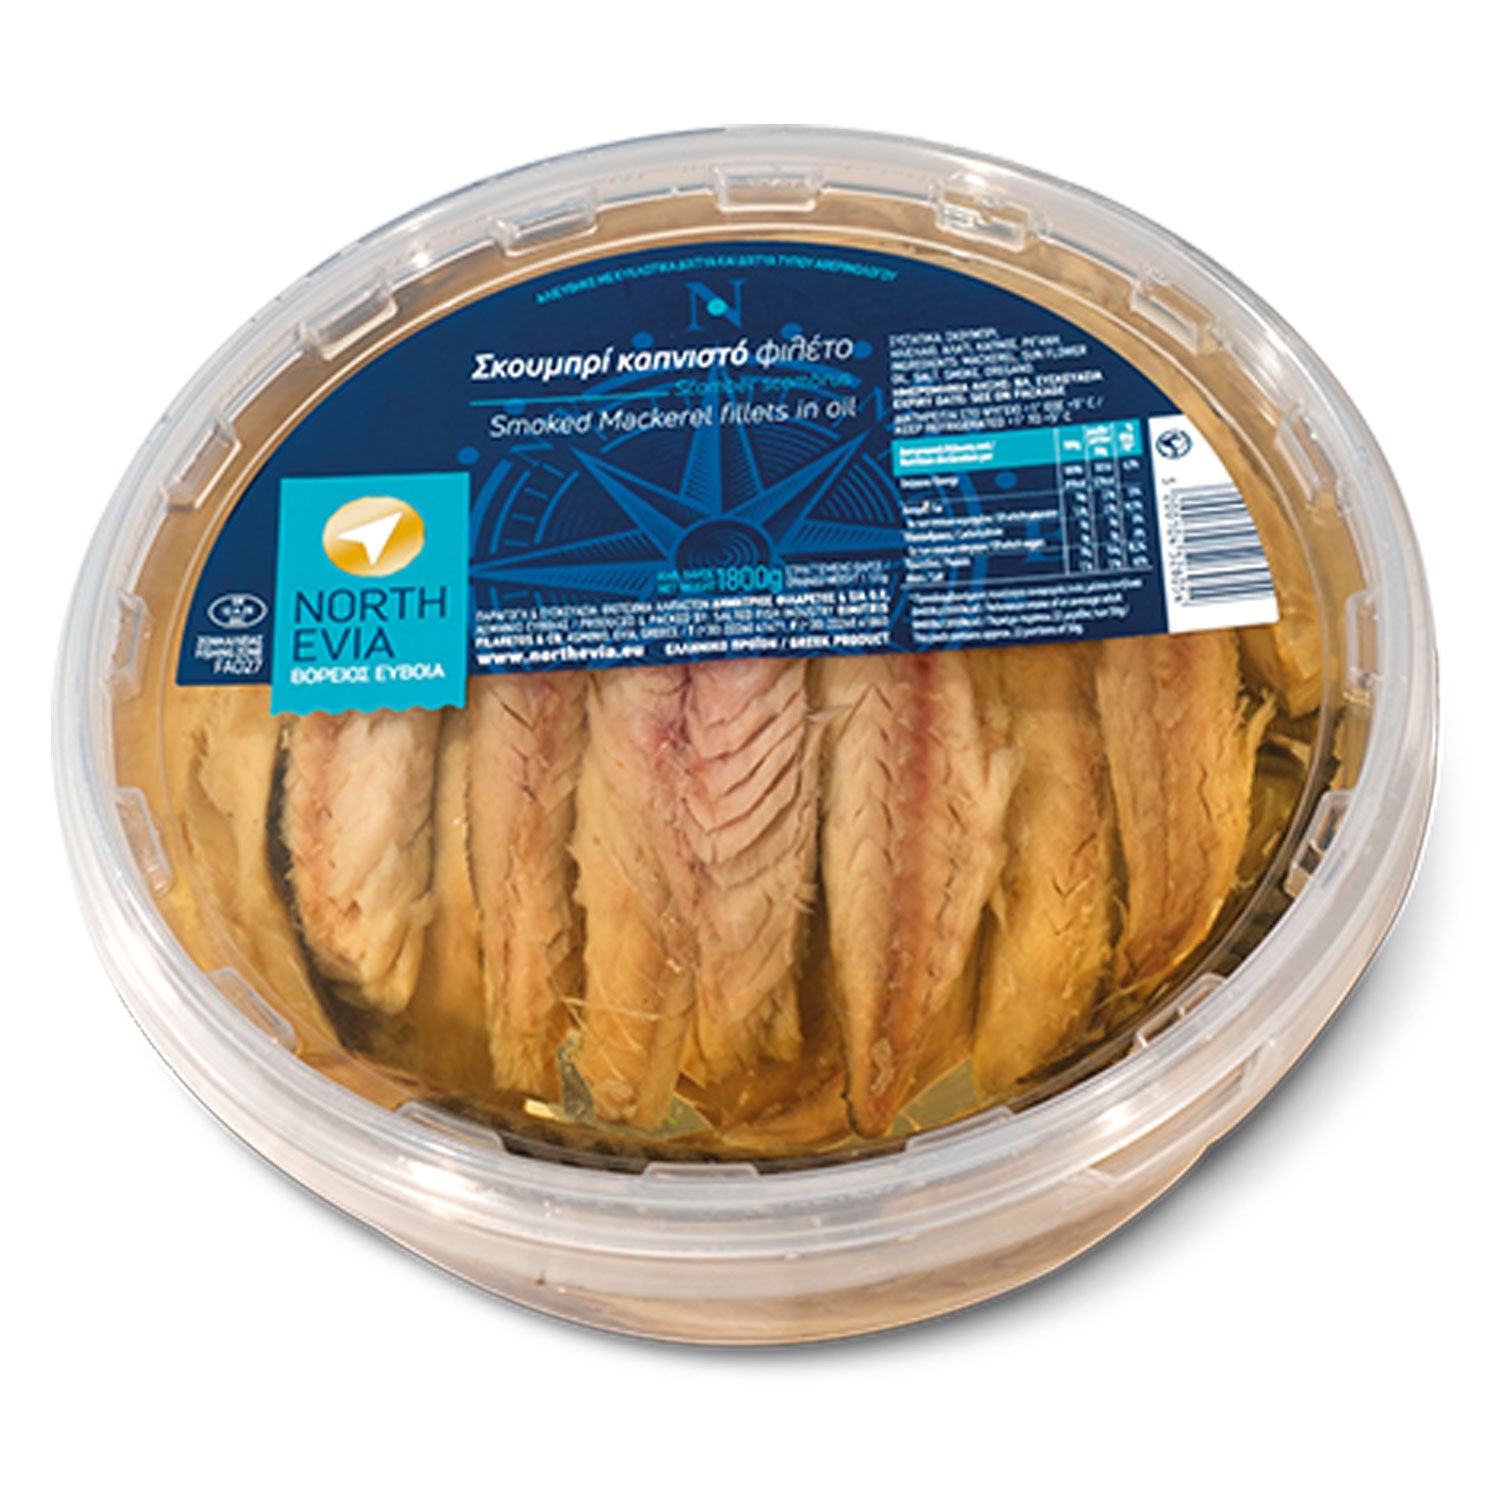 greek-products-smoked-mackerel-fillets-from-evia-2kg